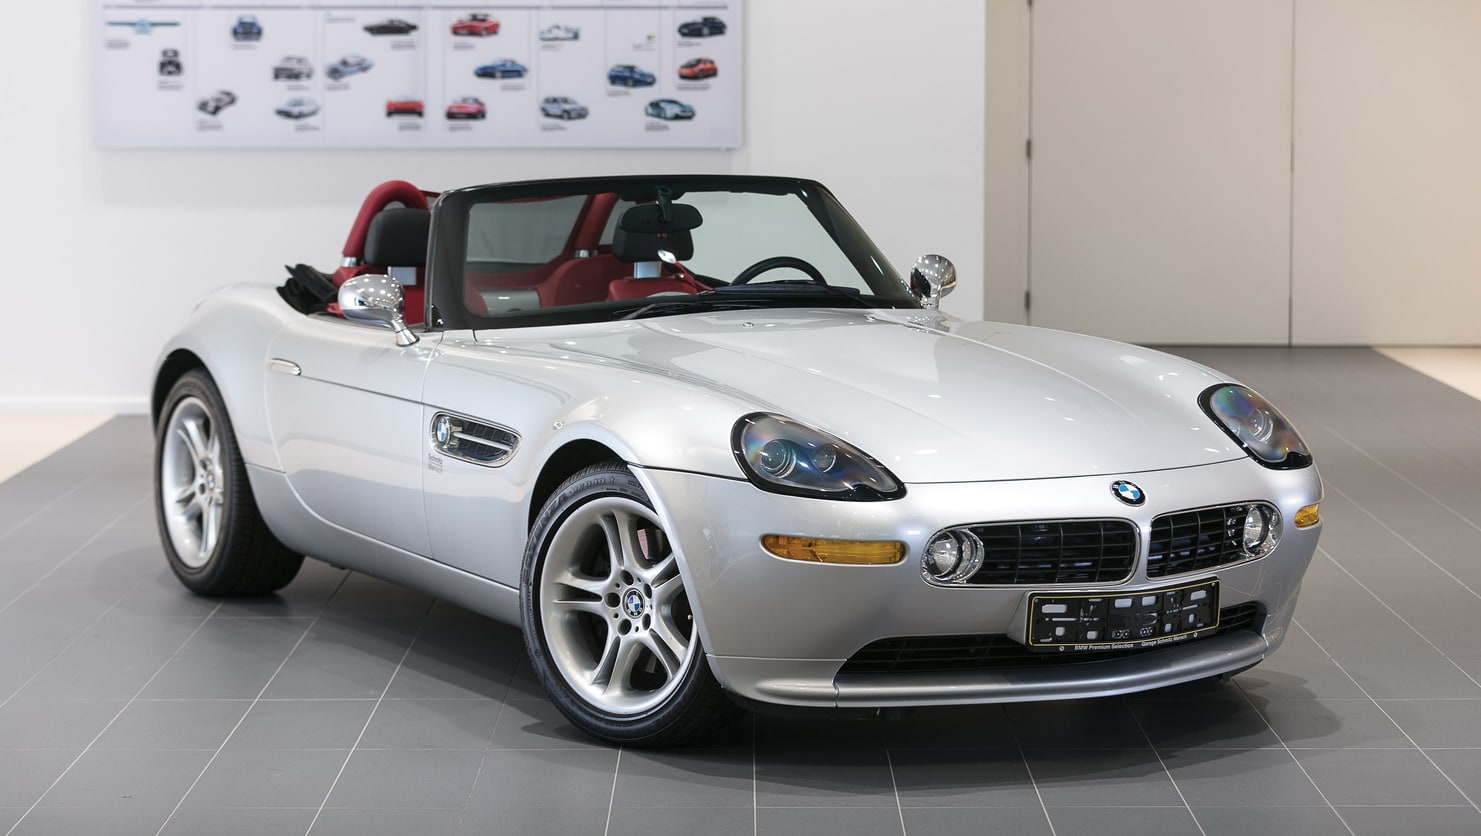 The Price Is Not Enough: Rare Brosnan-era BMW Z8 up for auction